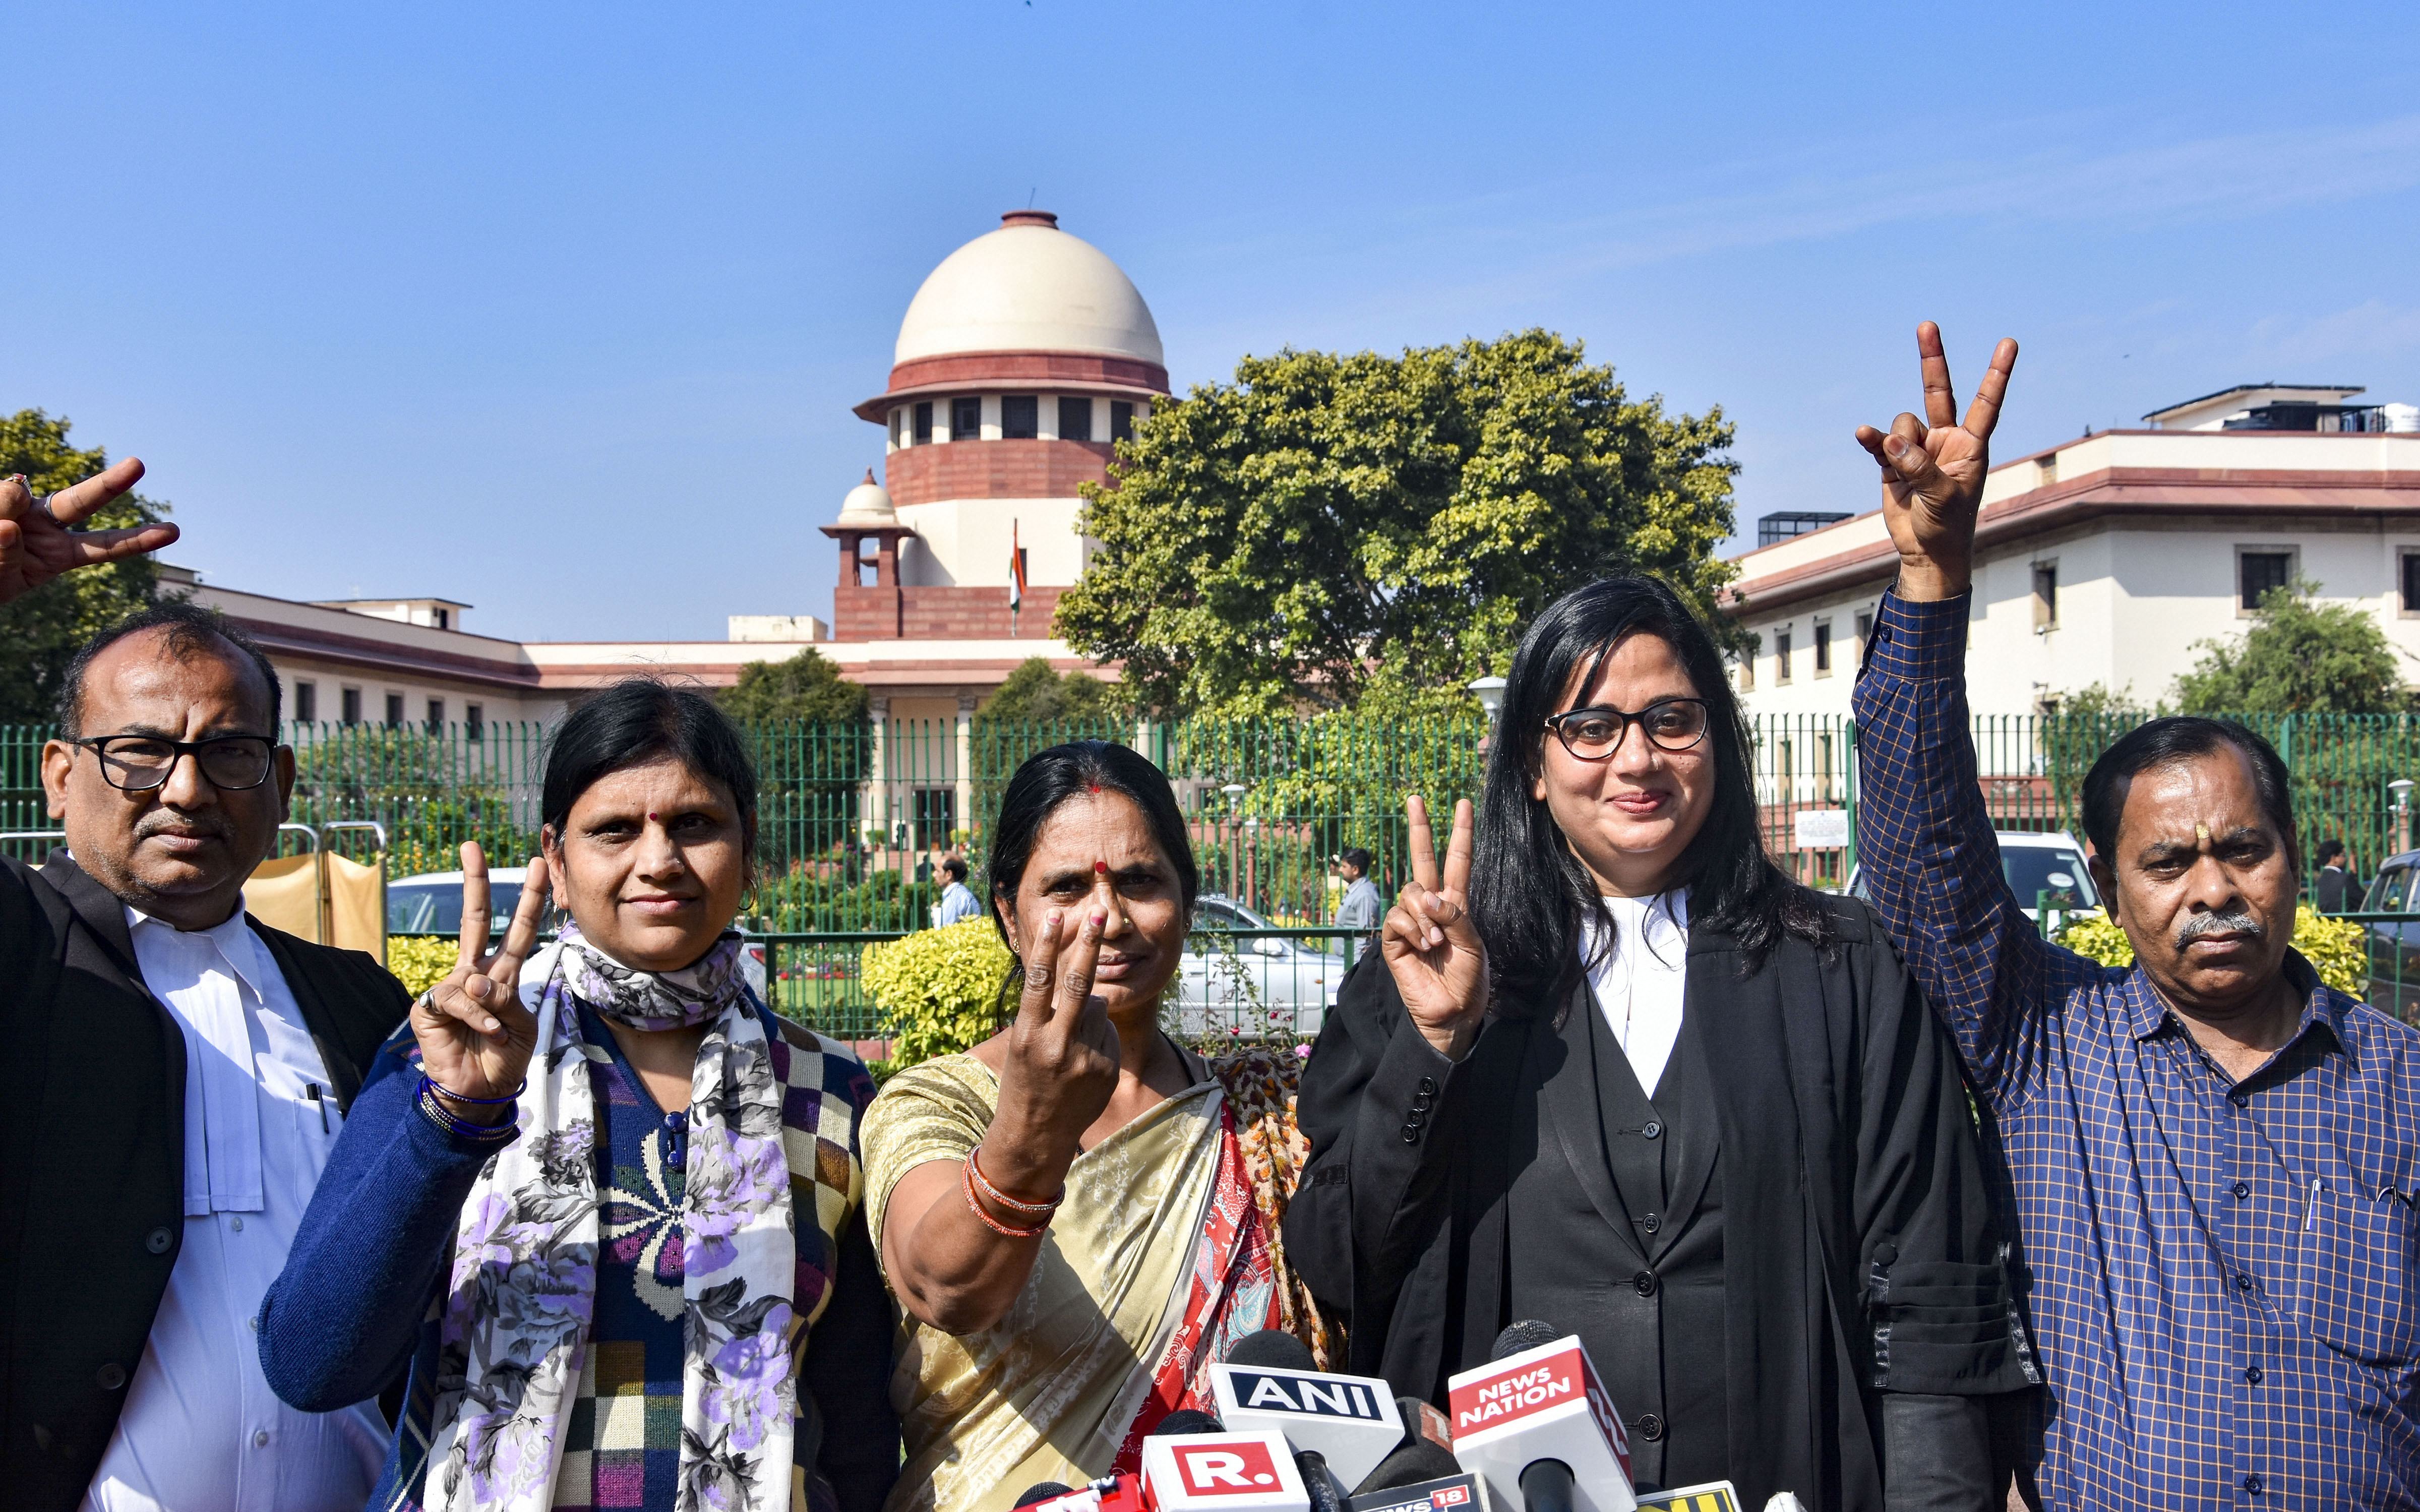 2102 Delhi rape and murder case victim's mother and father flash the victory sigh while speaking to media personnel outside Supreme Court in New Delhi, Monday, March 16, 2020
